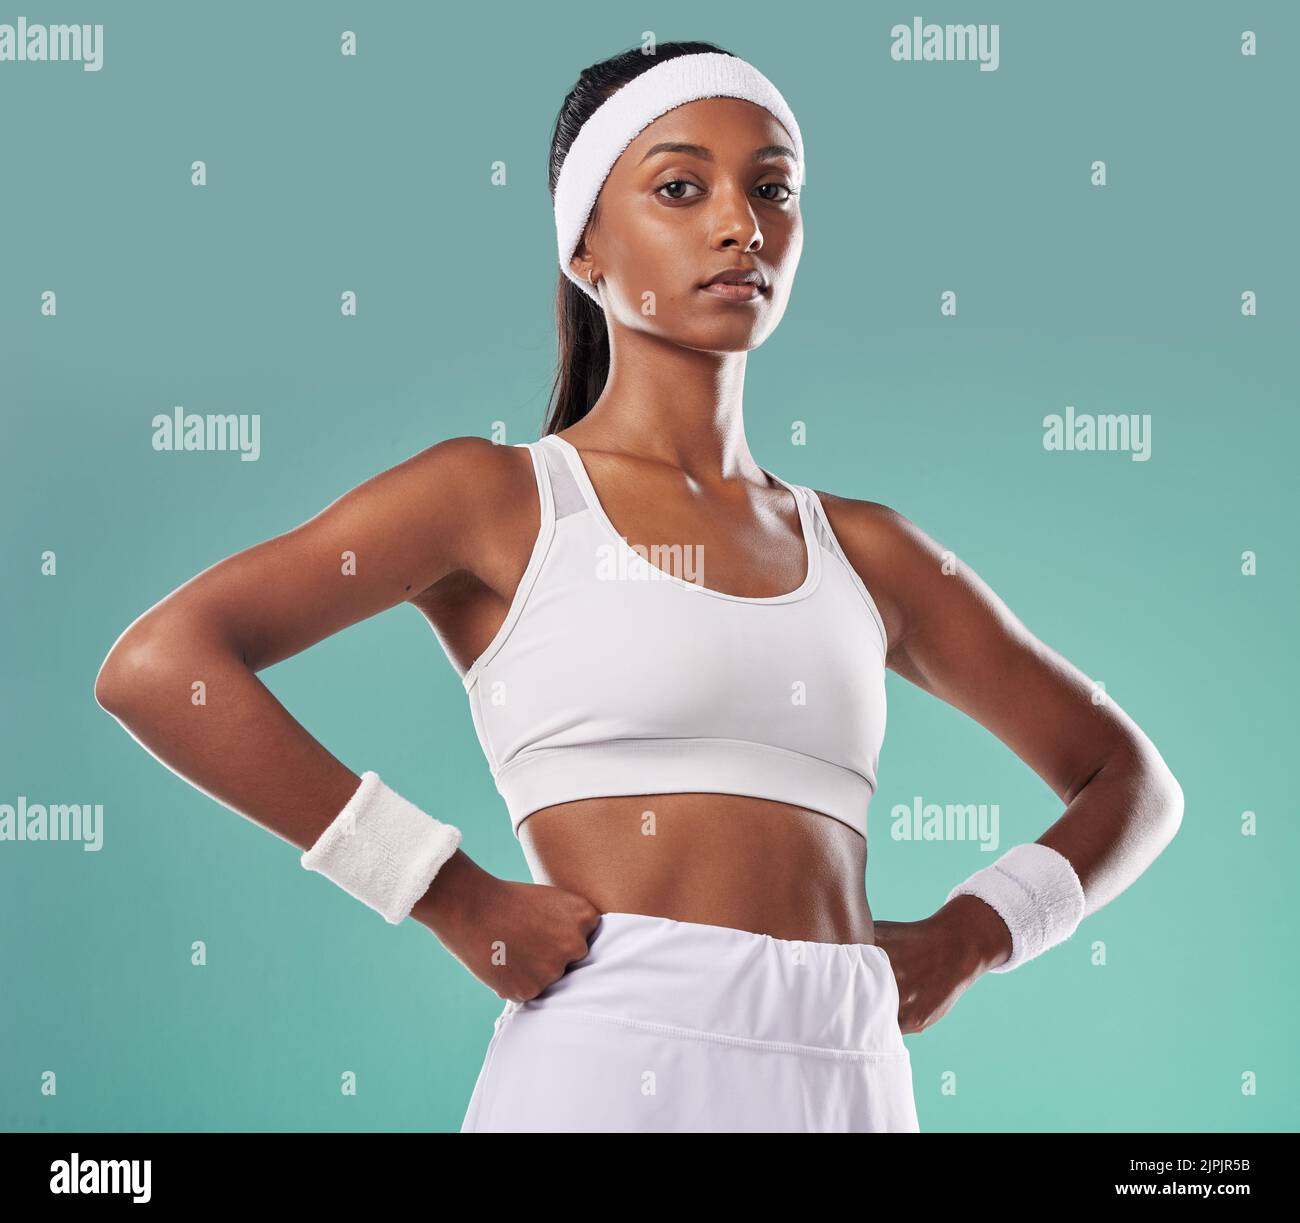 Wellness, fitness and power by a confident athletic woman serious about her health and body goals. Portrait of a gym trainer or coach with an Stock Photo